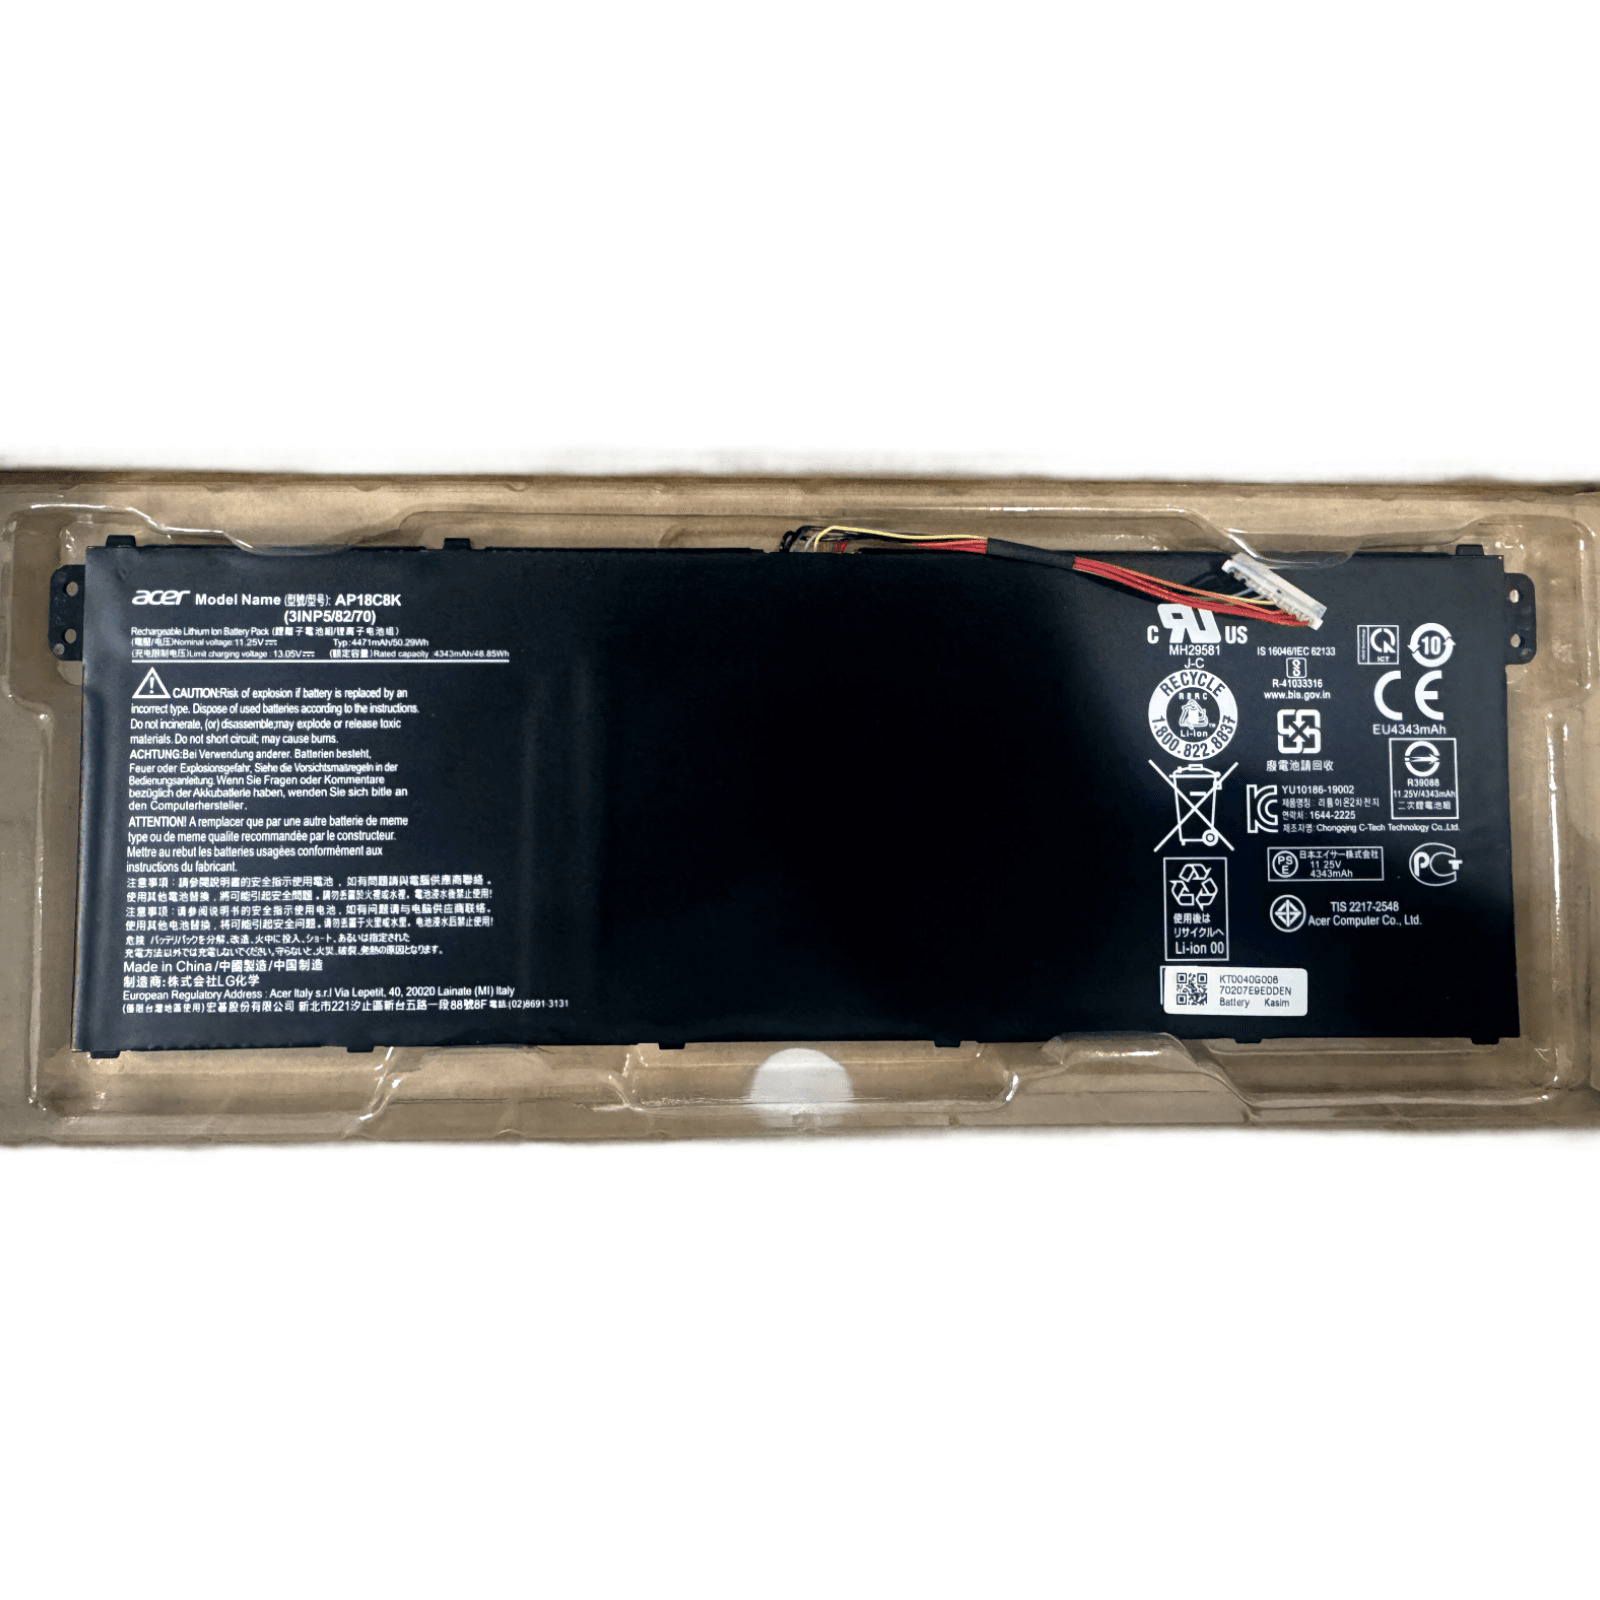 New Genuine AP18C8K AC18C8K Battery For Acer Aspire 5 A514-52 A515-43 A515-54 US